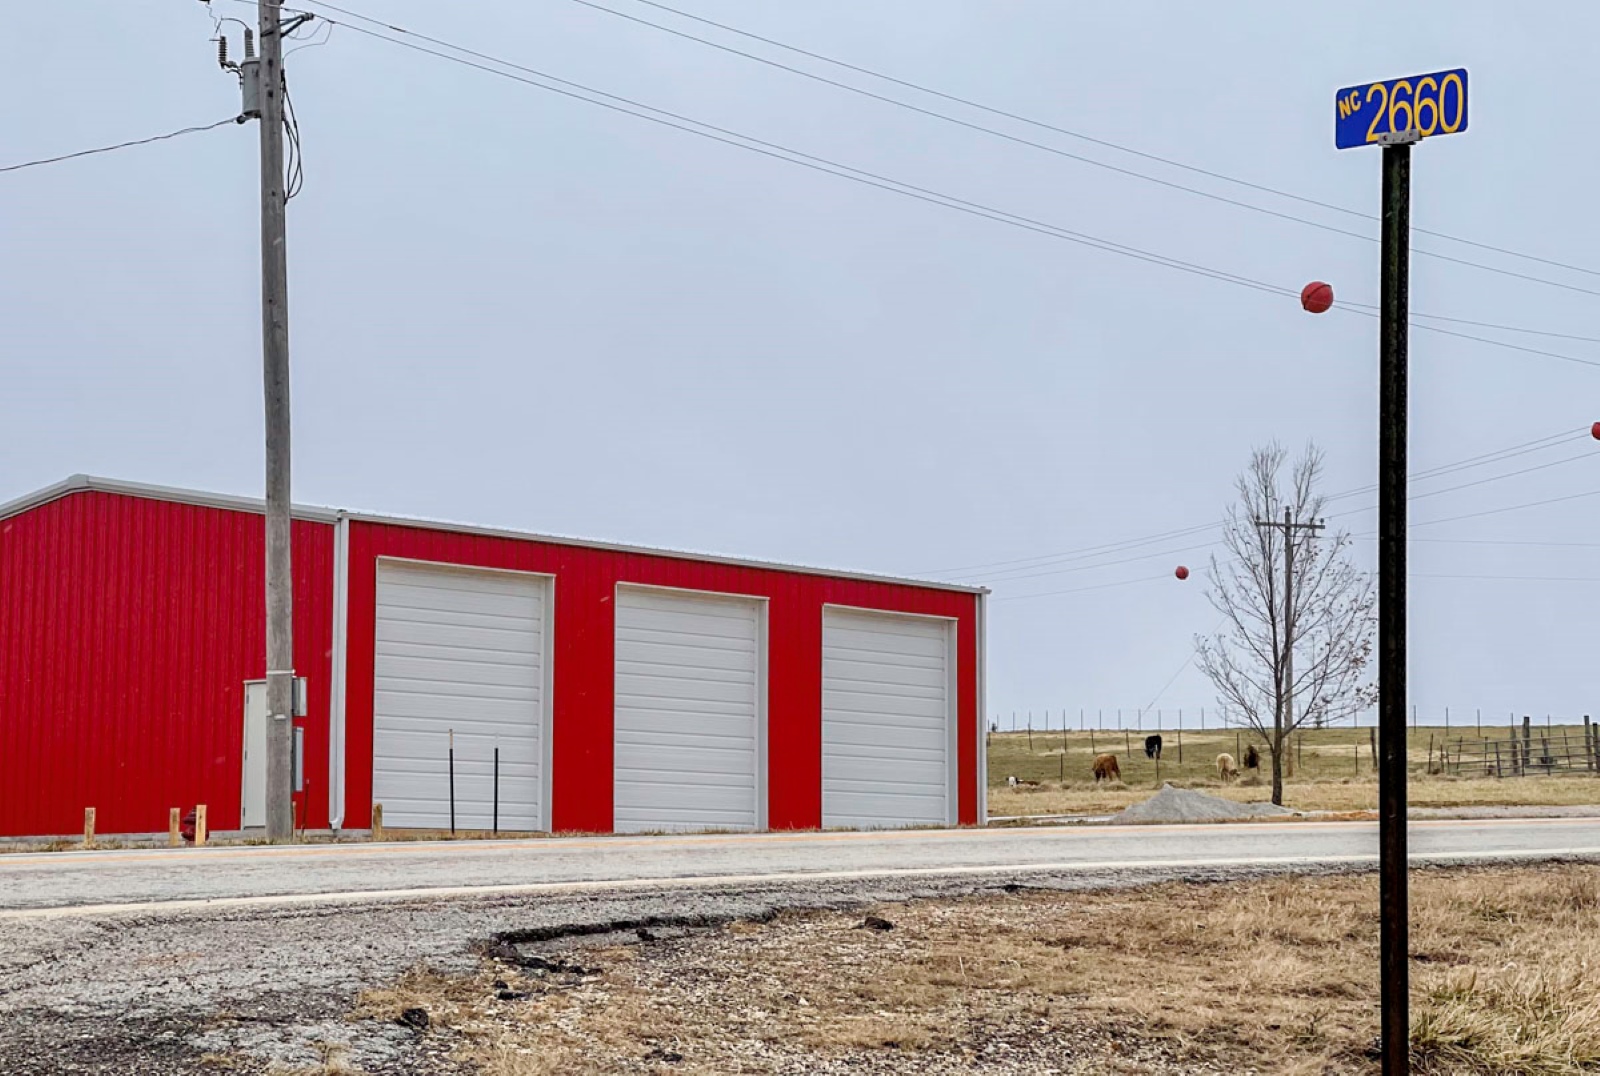 It’s easy to find NC 2660 — the gravel road turn off from Arkansas 43 in Compton — when you watch for the bright red fire station.  (Photo by Sony Hocklander)